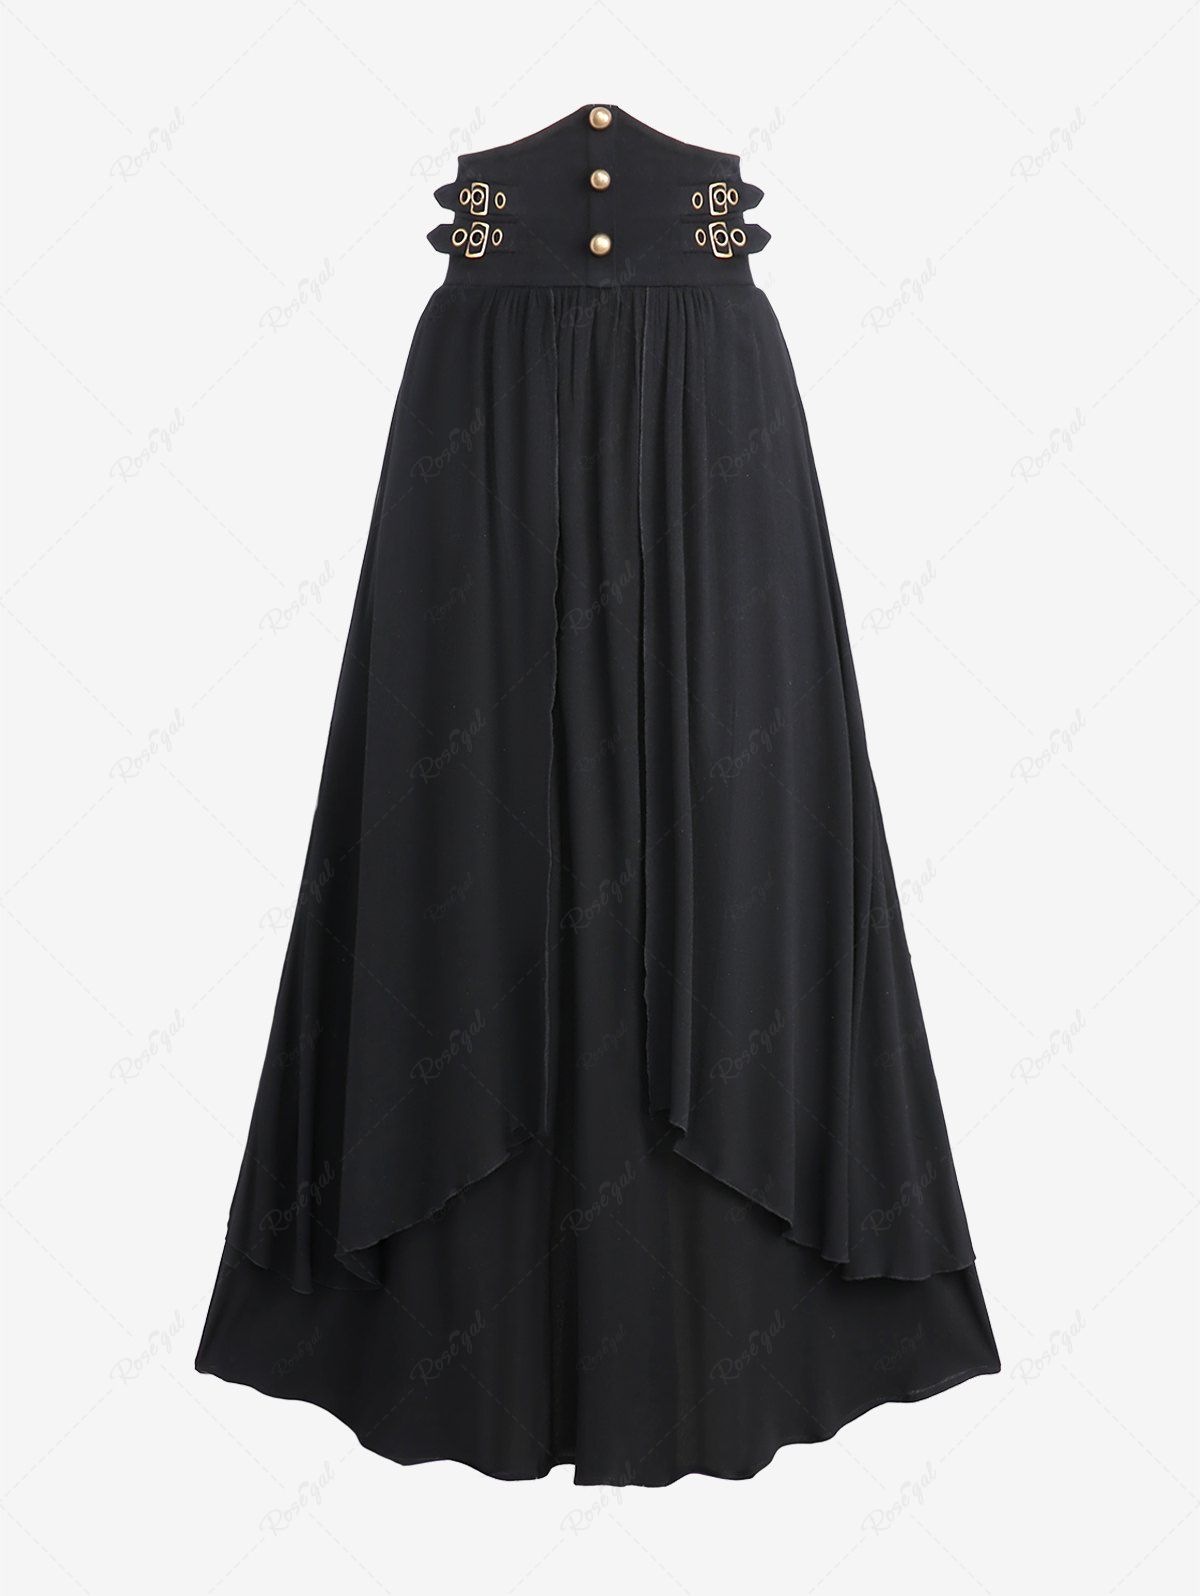 Gothic Strap Buckle Grommet Rivet Layered Ruched Solid A Line Skirt